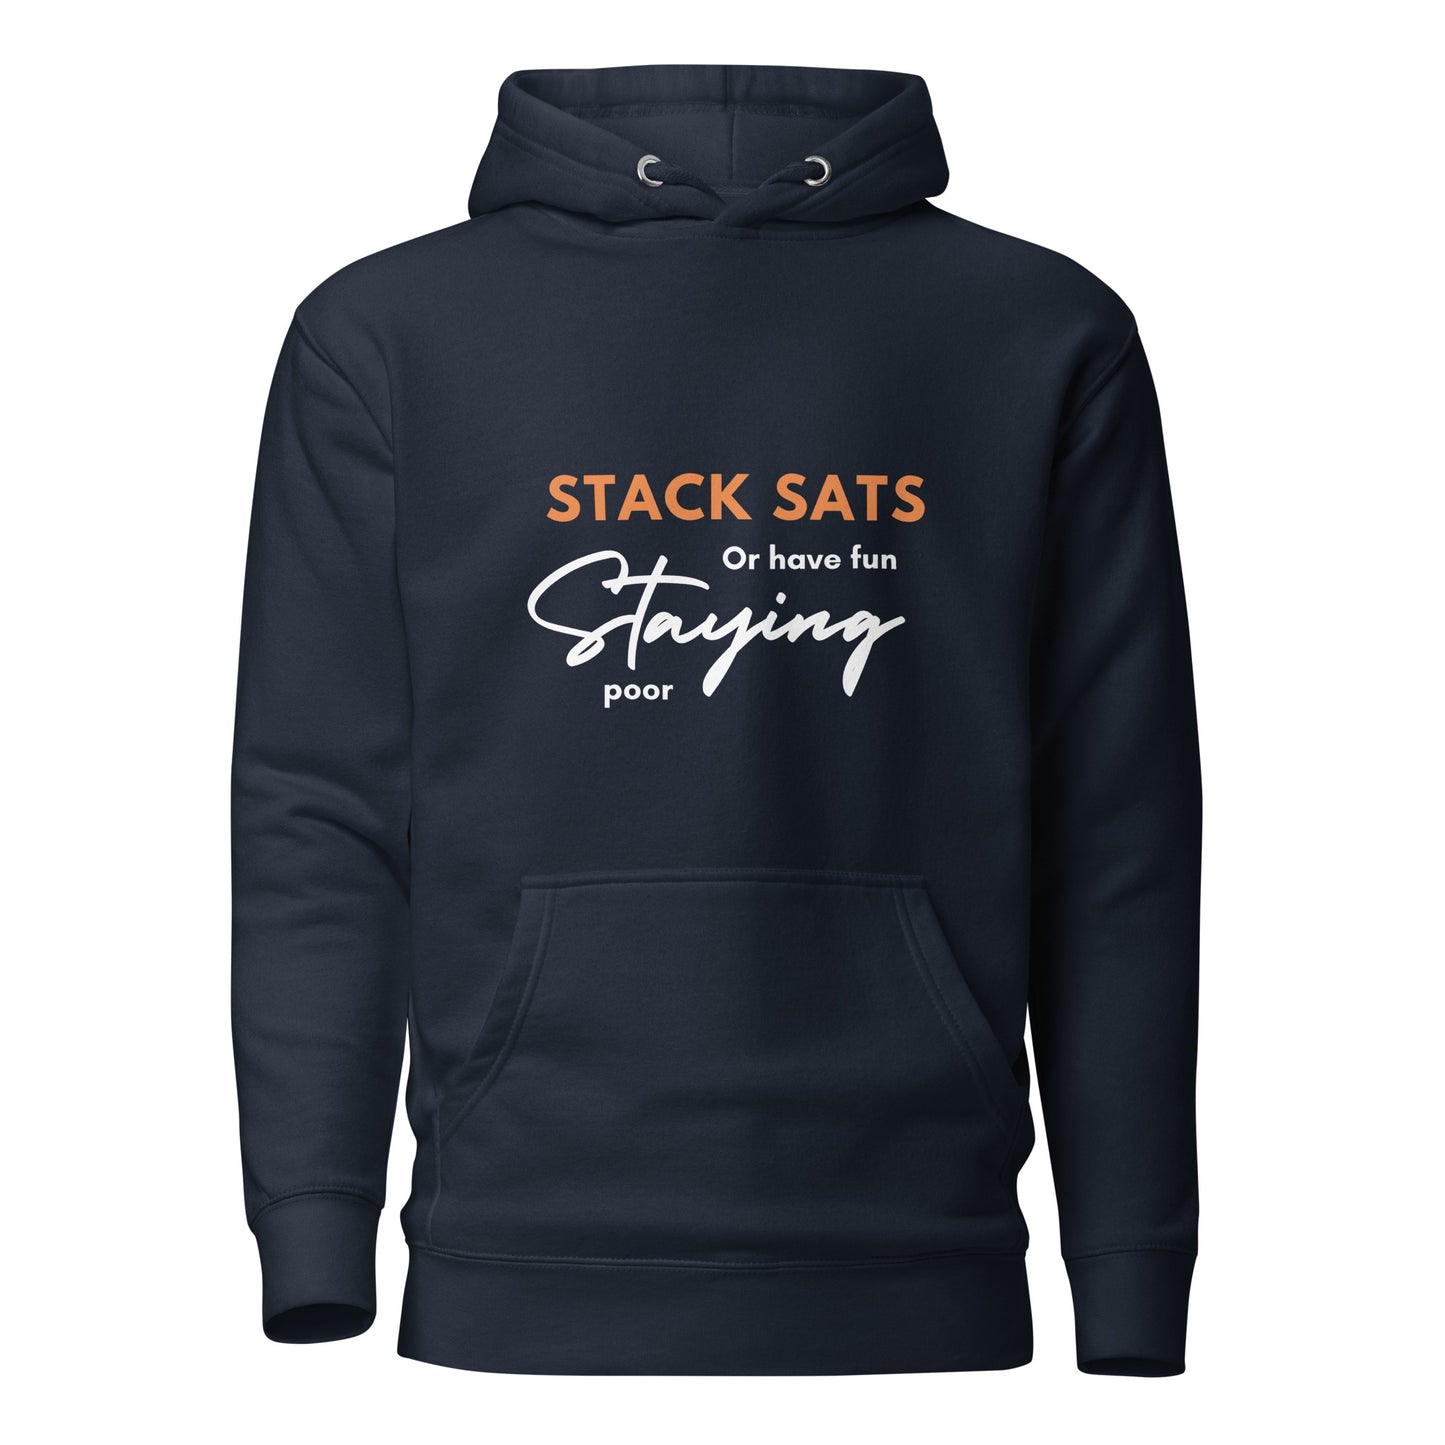 Stack sats or have fun staying poor Unisex Hoodie